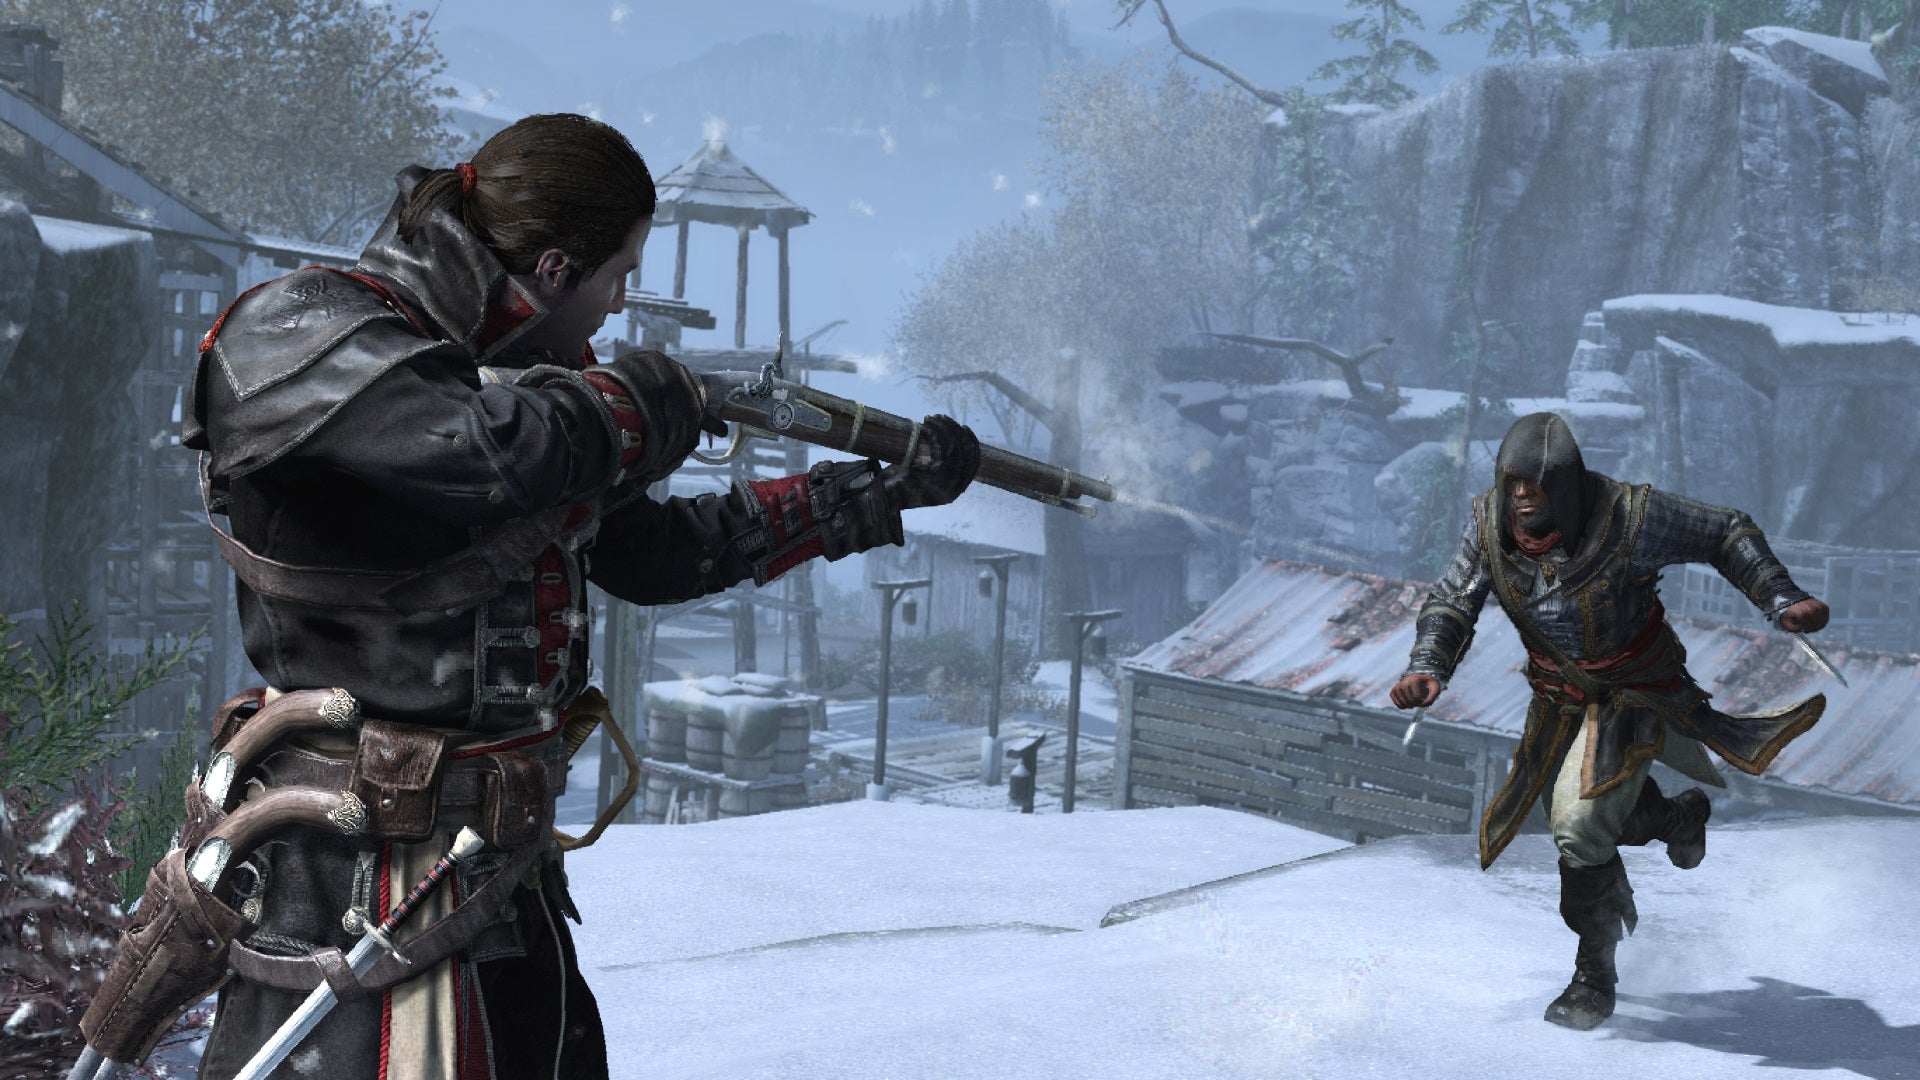 Assassin's Creed: Rogue Remastered gameplay screenshot with two characters.